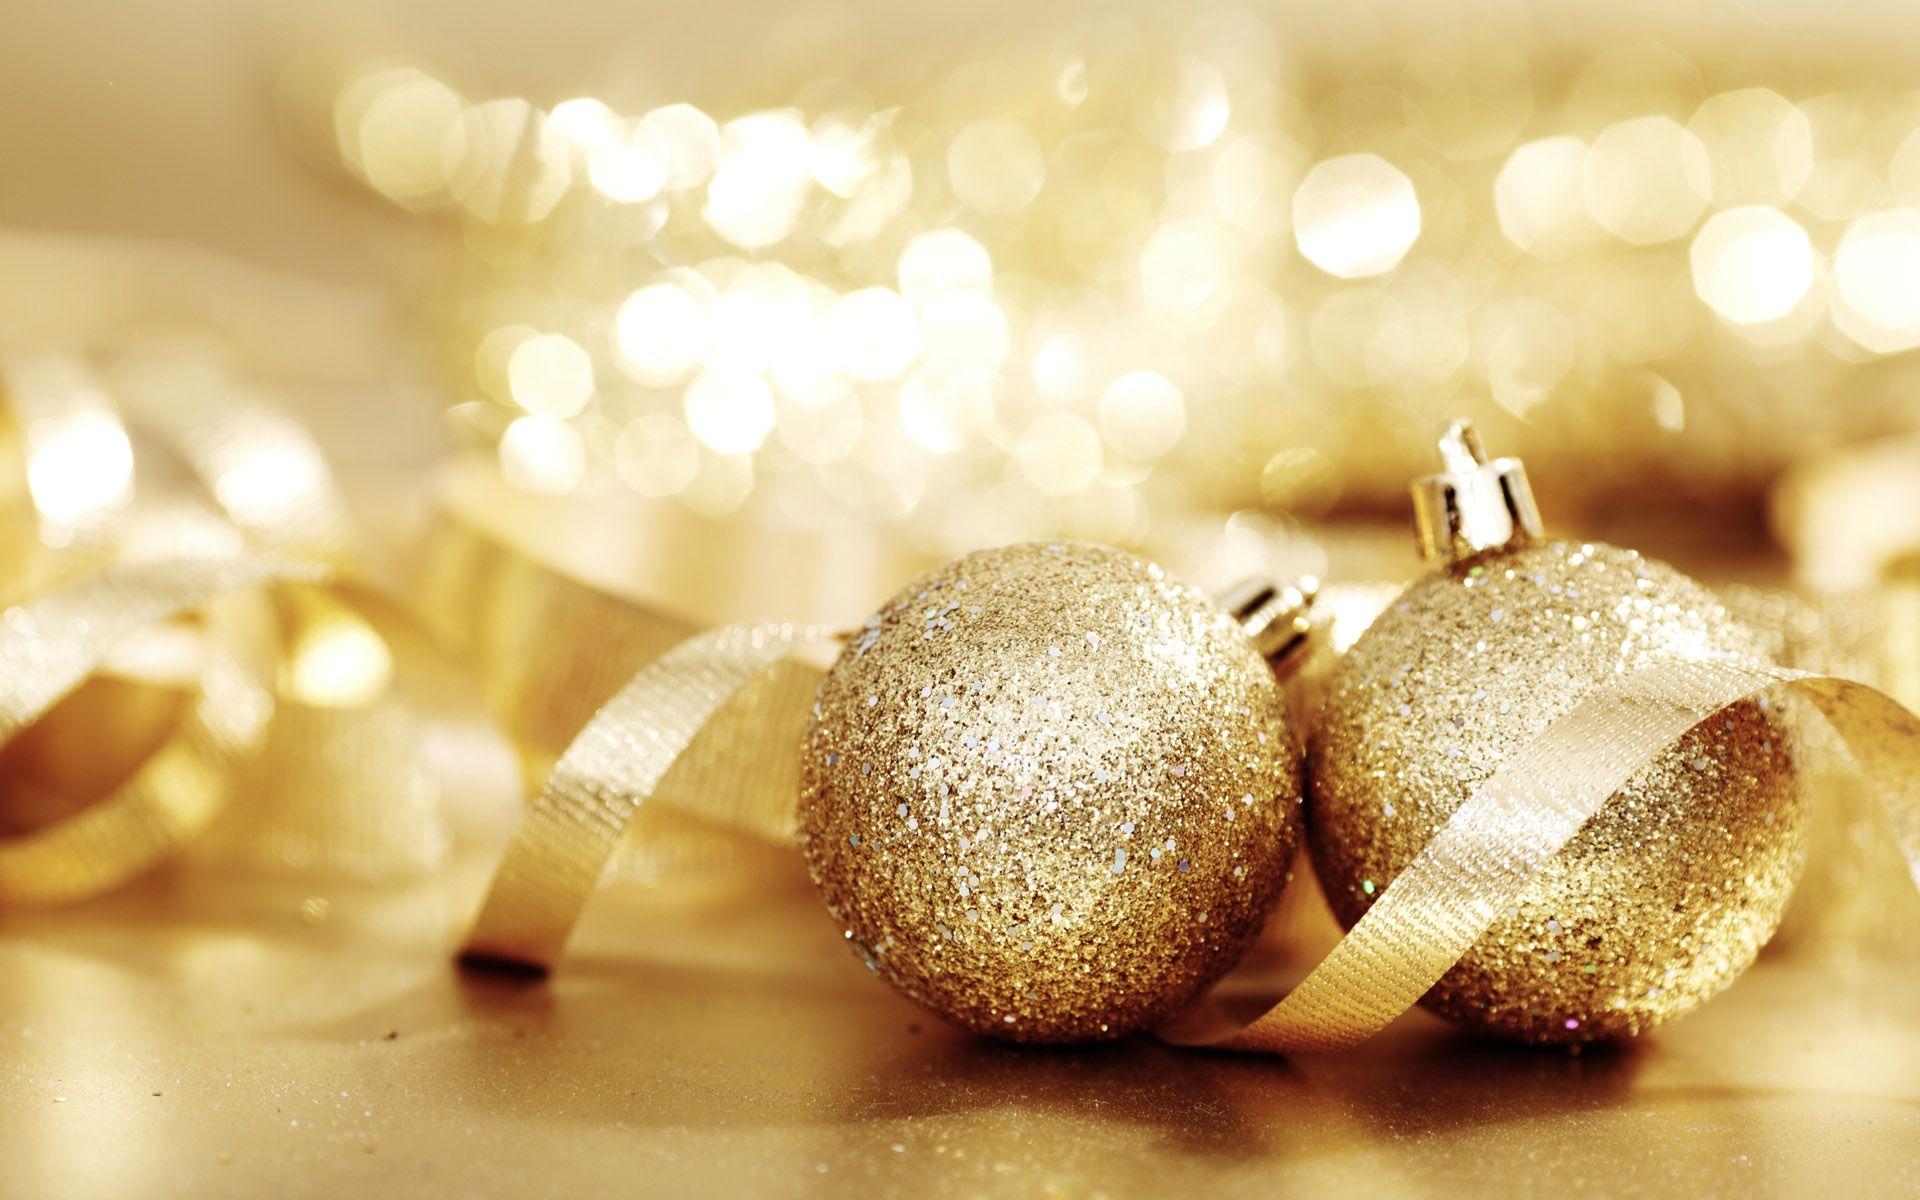 gold holiday backgrounds